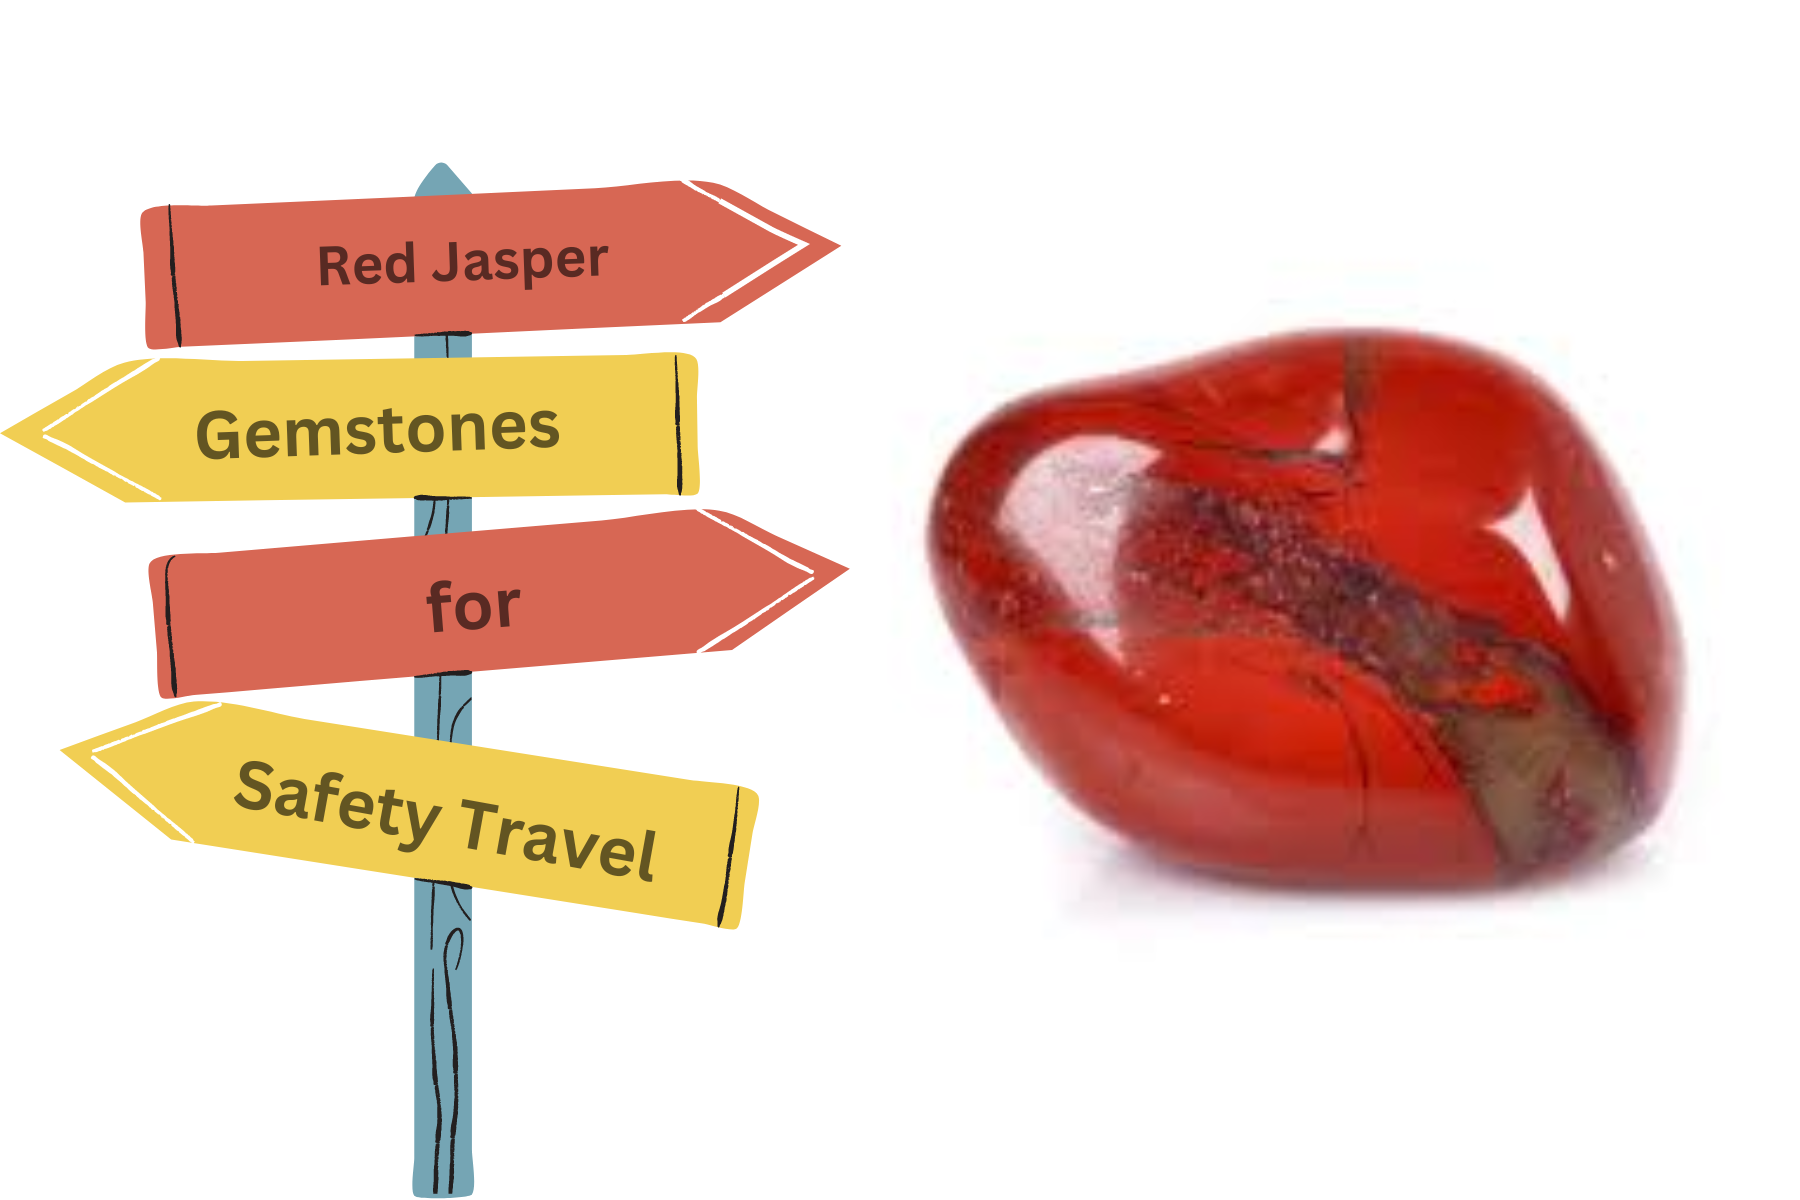 Red Jasper and wooden posts with the words "Red Jasper Gemstones for Safety Travel"